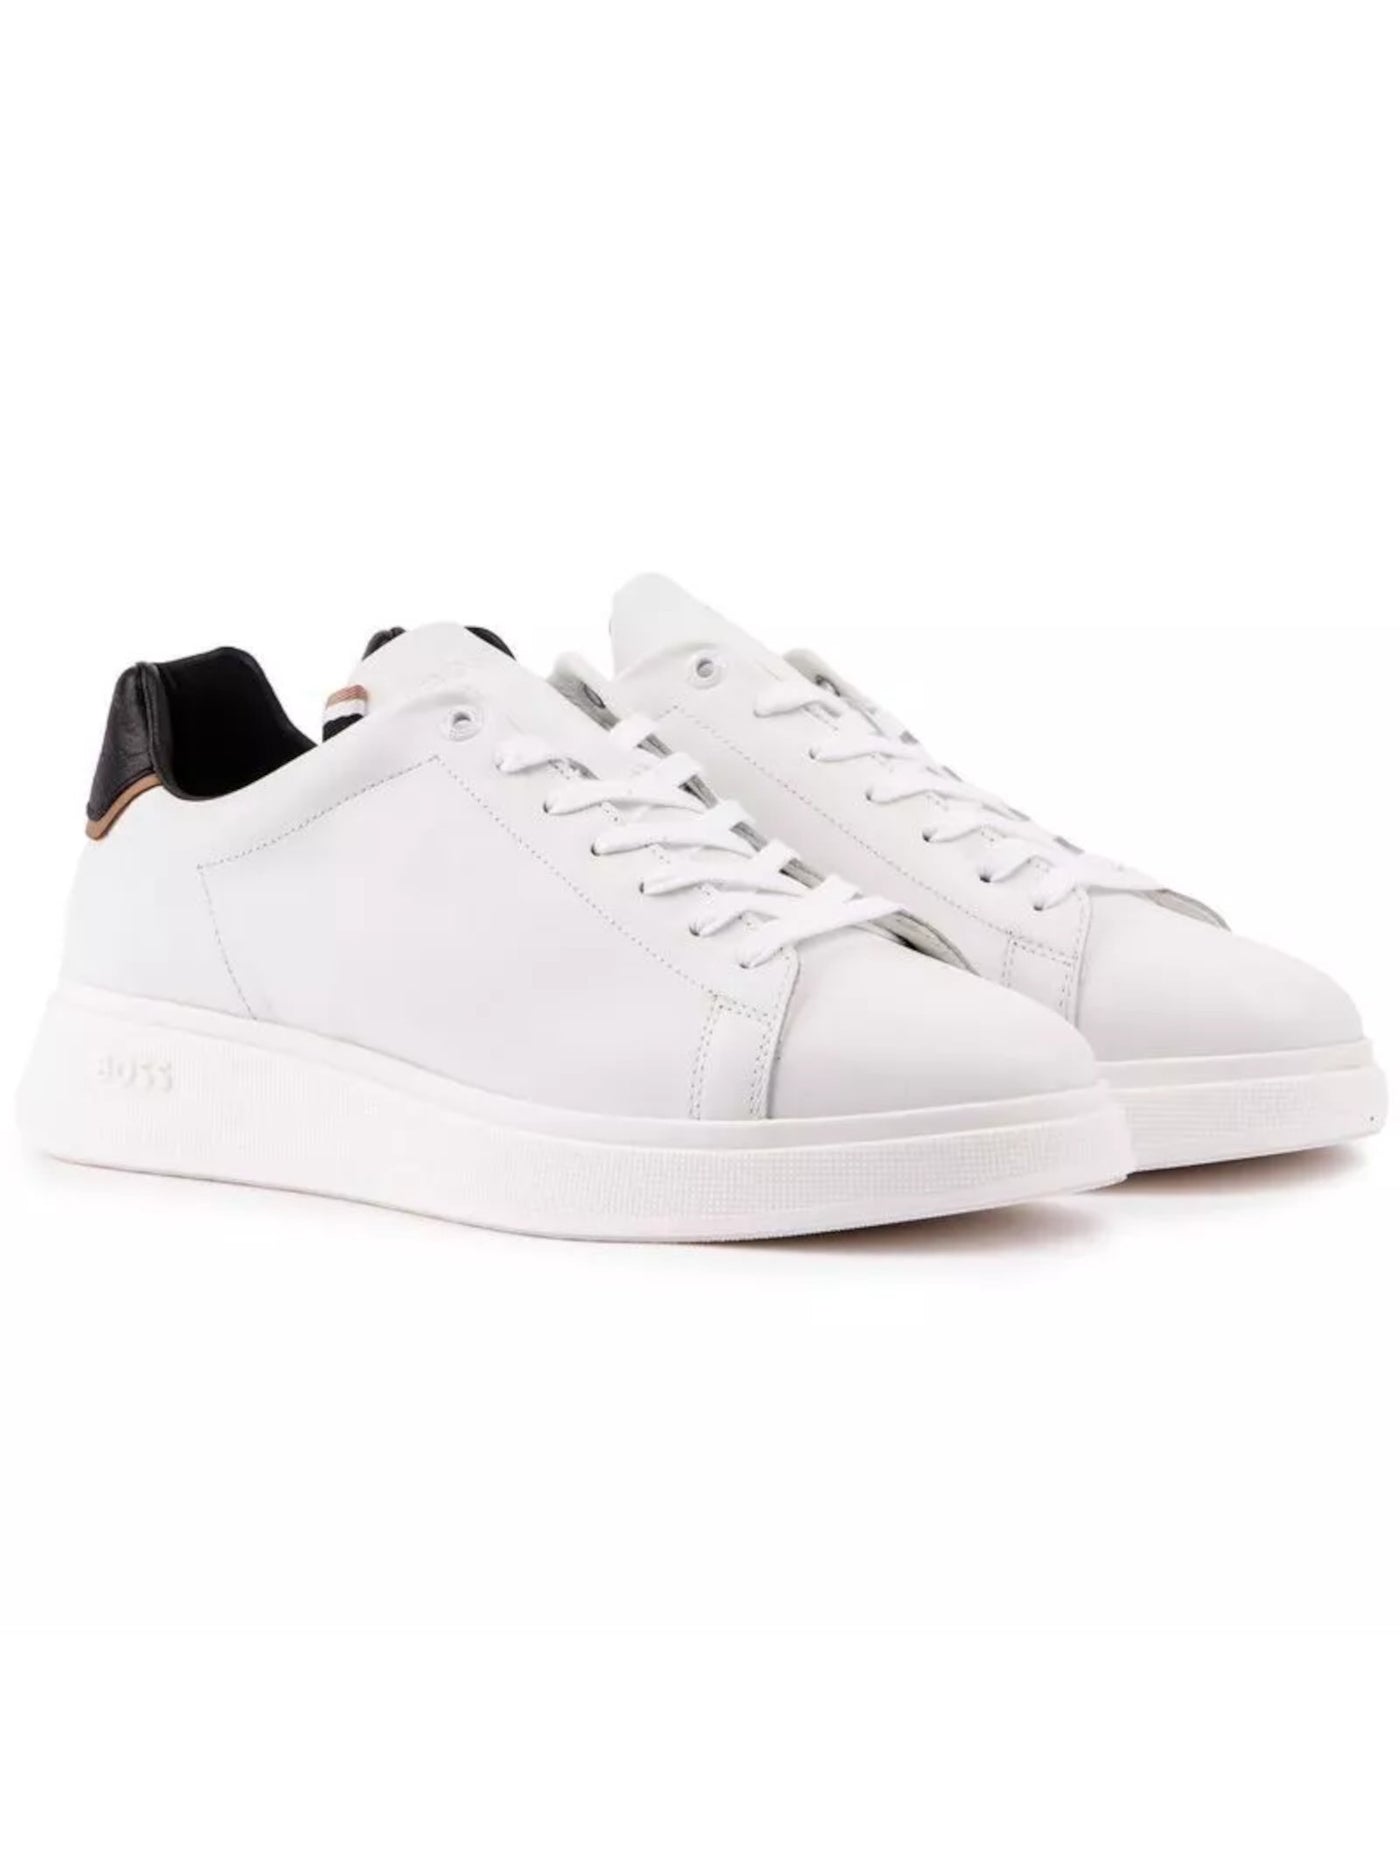 BOSS Mens White Logo Padded Bulton Round Toe Wedge Lace-Up Leather Sneakers Shoes 7